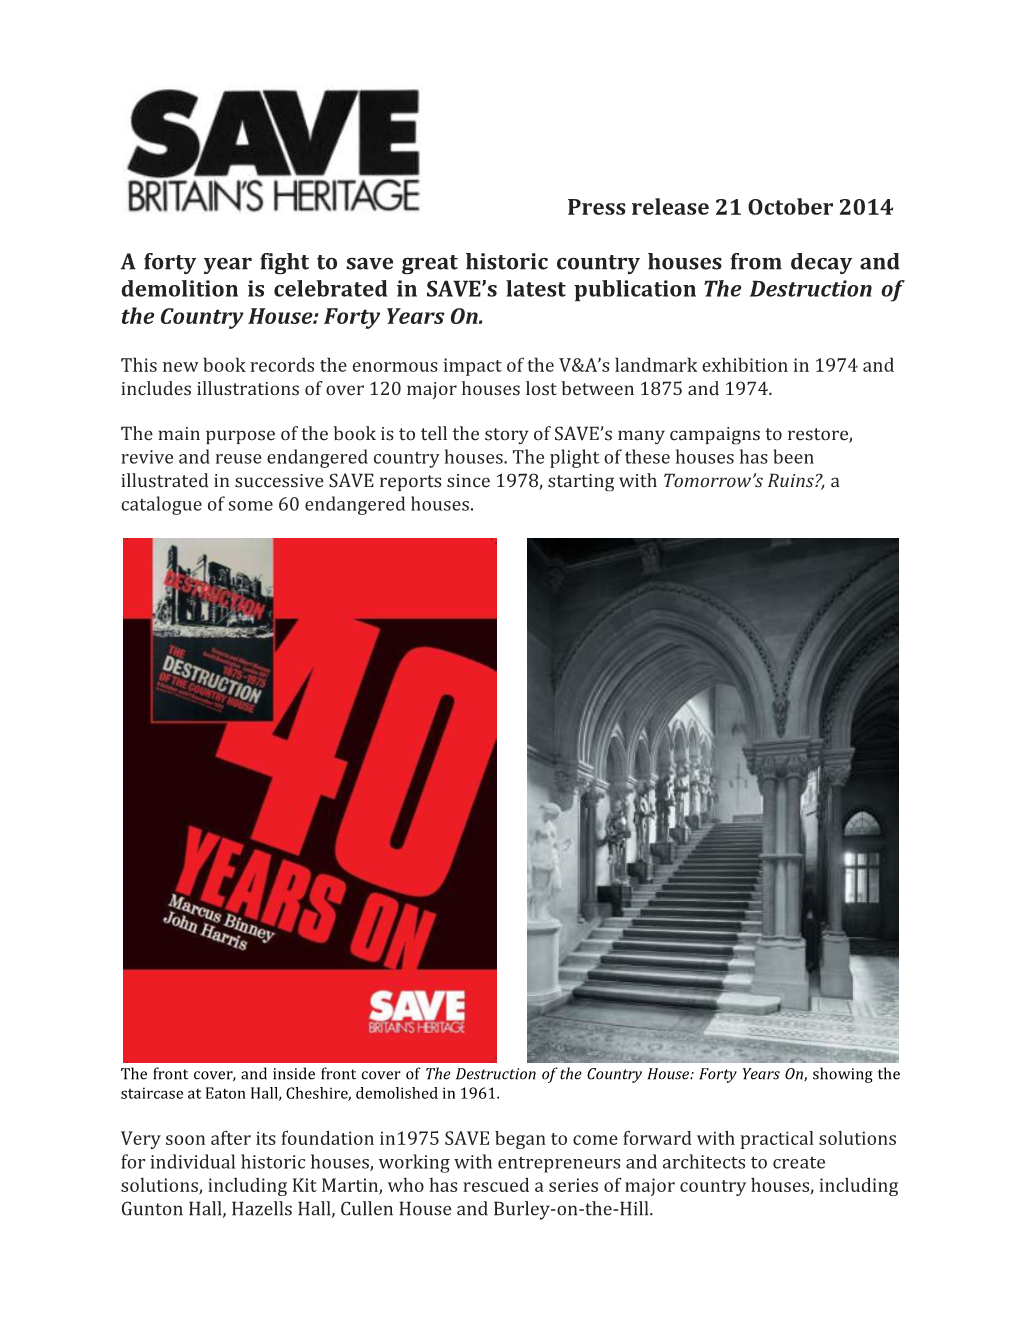 Press Release 21 October 2014 a Forty Year Fight